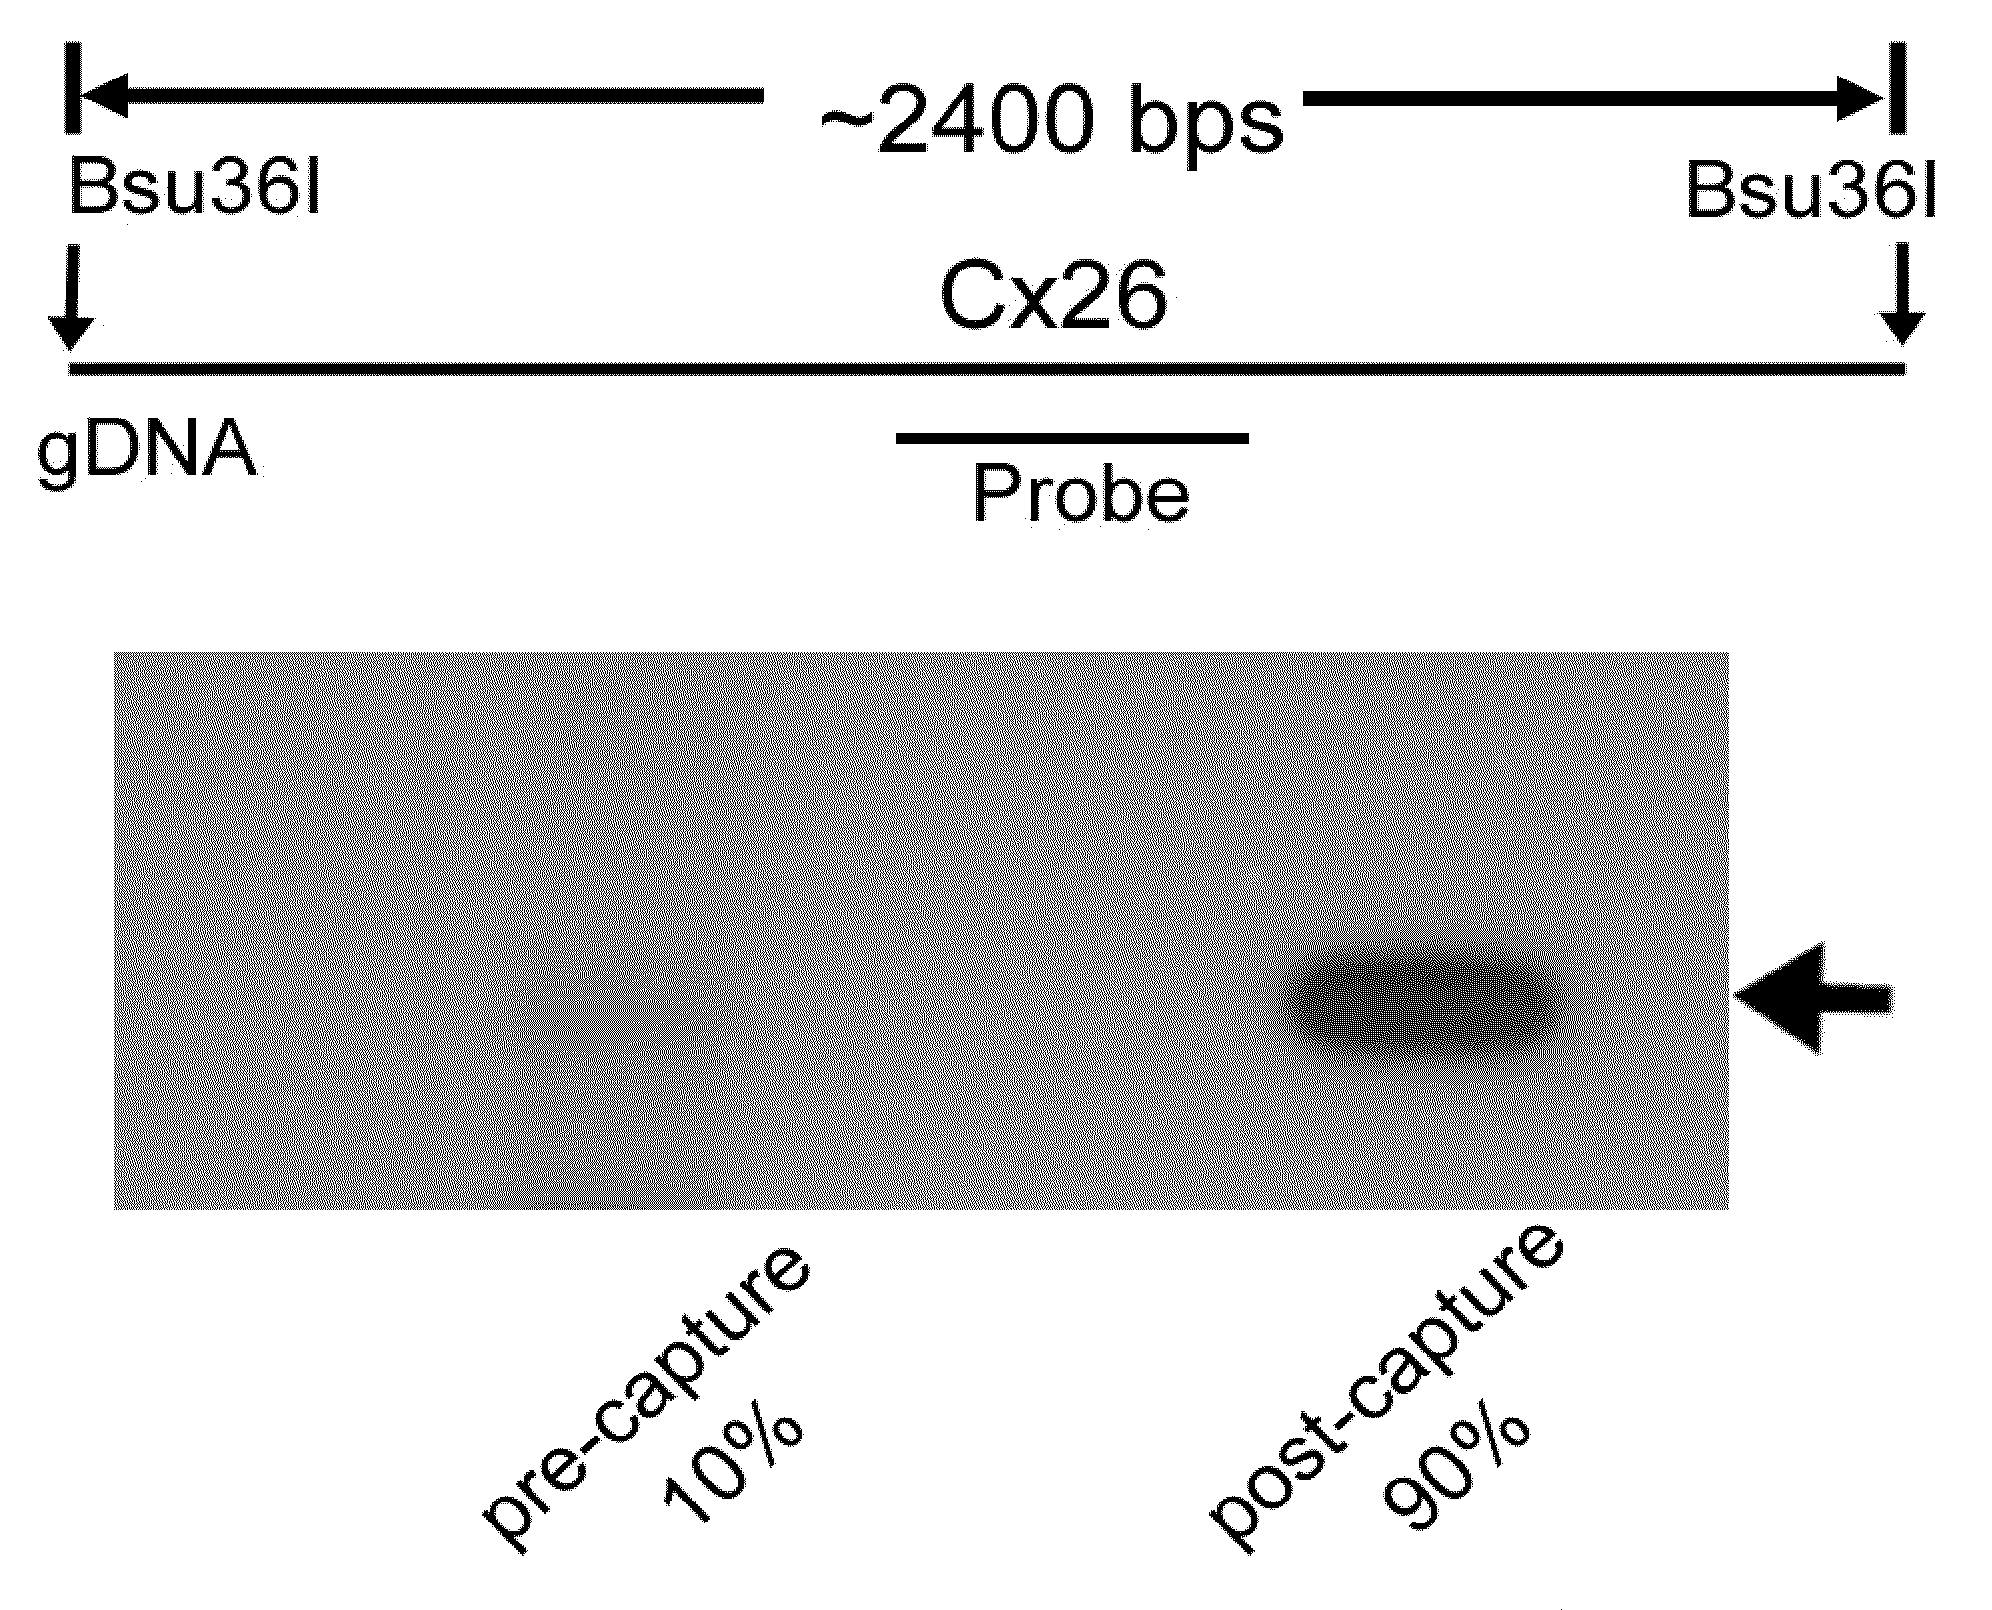 Methods for selectively capturing and amplifying exons or targeted genomic regions from biological samples